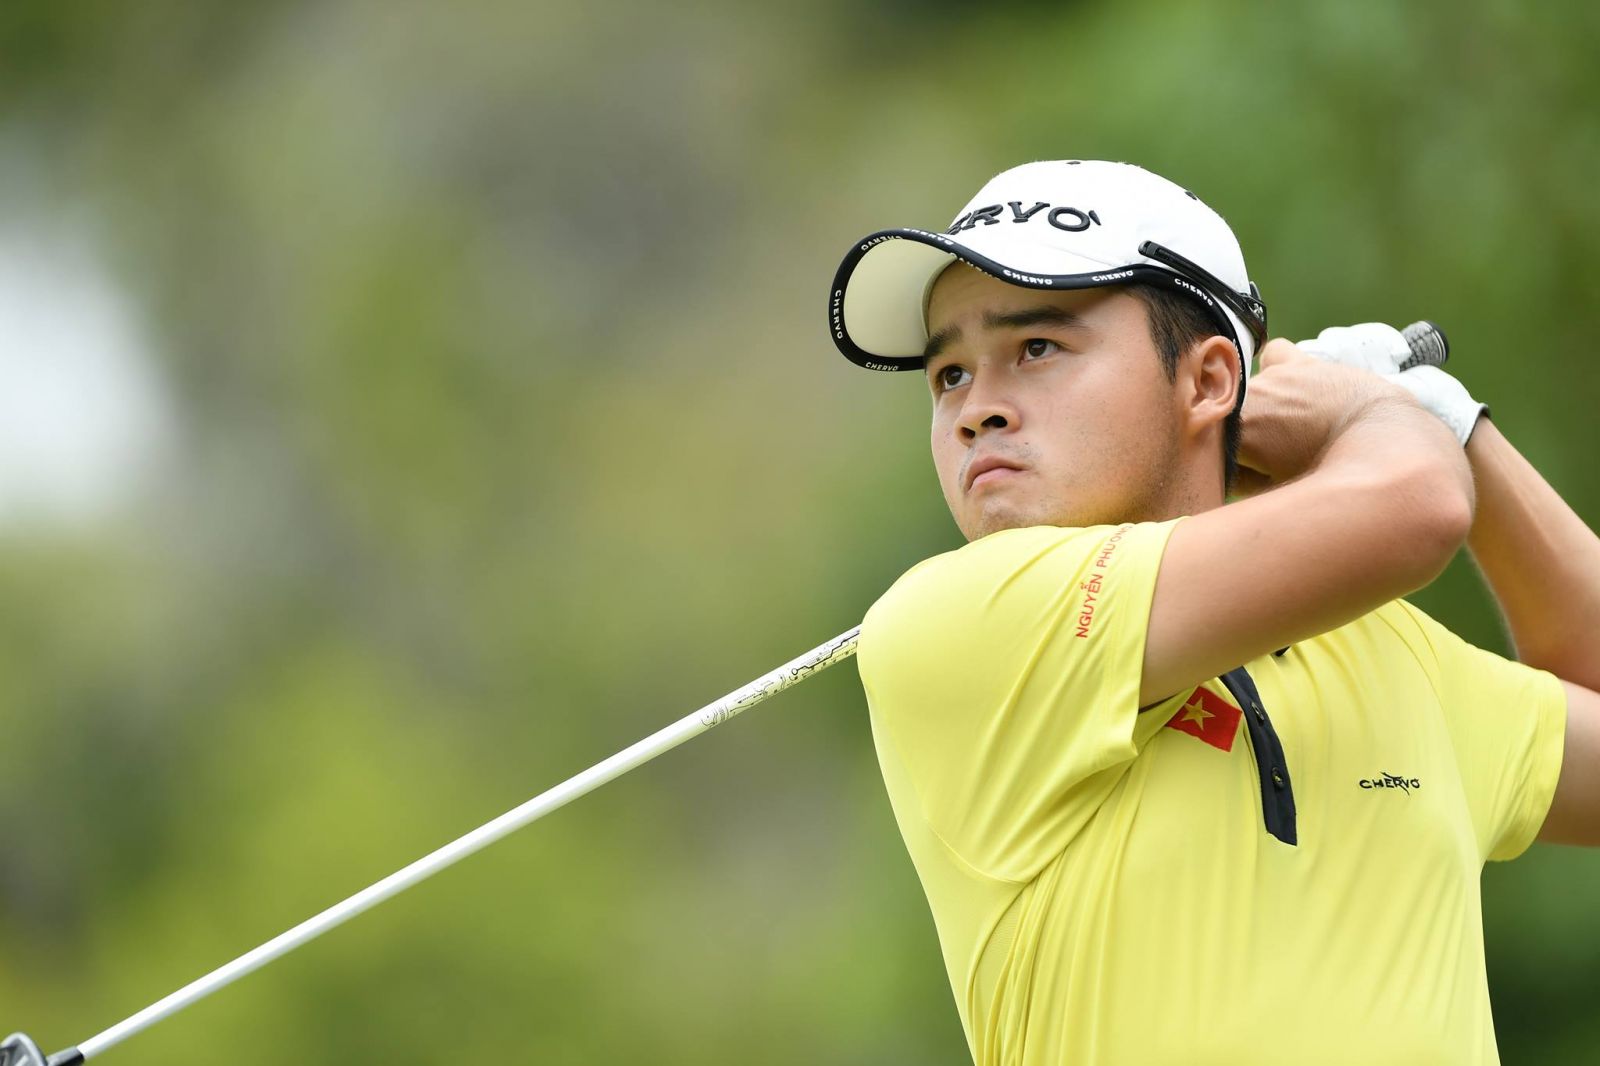 Nguyen Phuong Toan left a mark in Vietnamese golf history at SEA Games 29